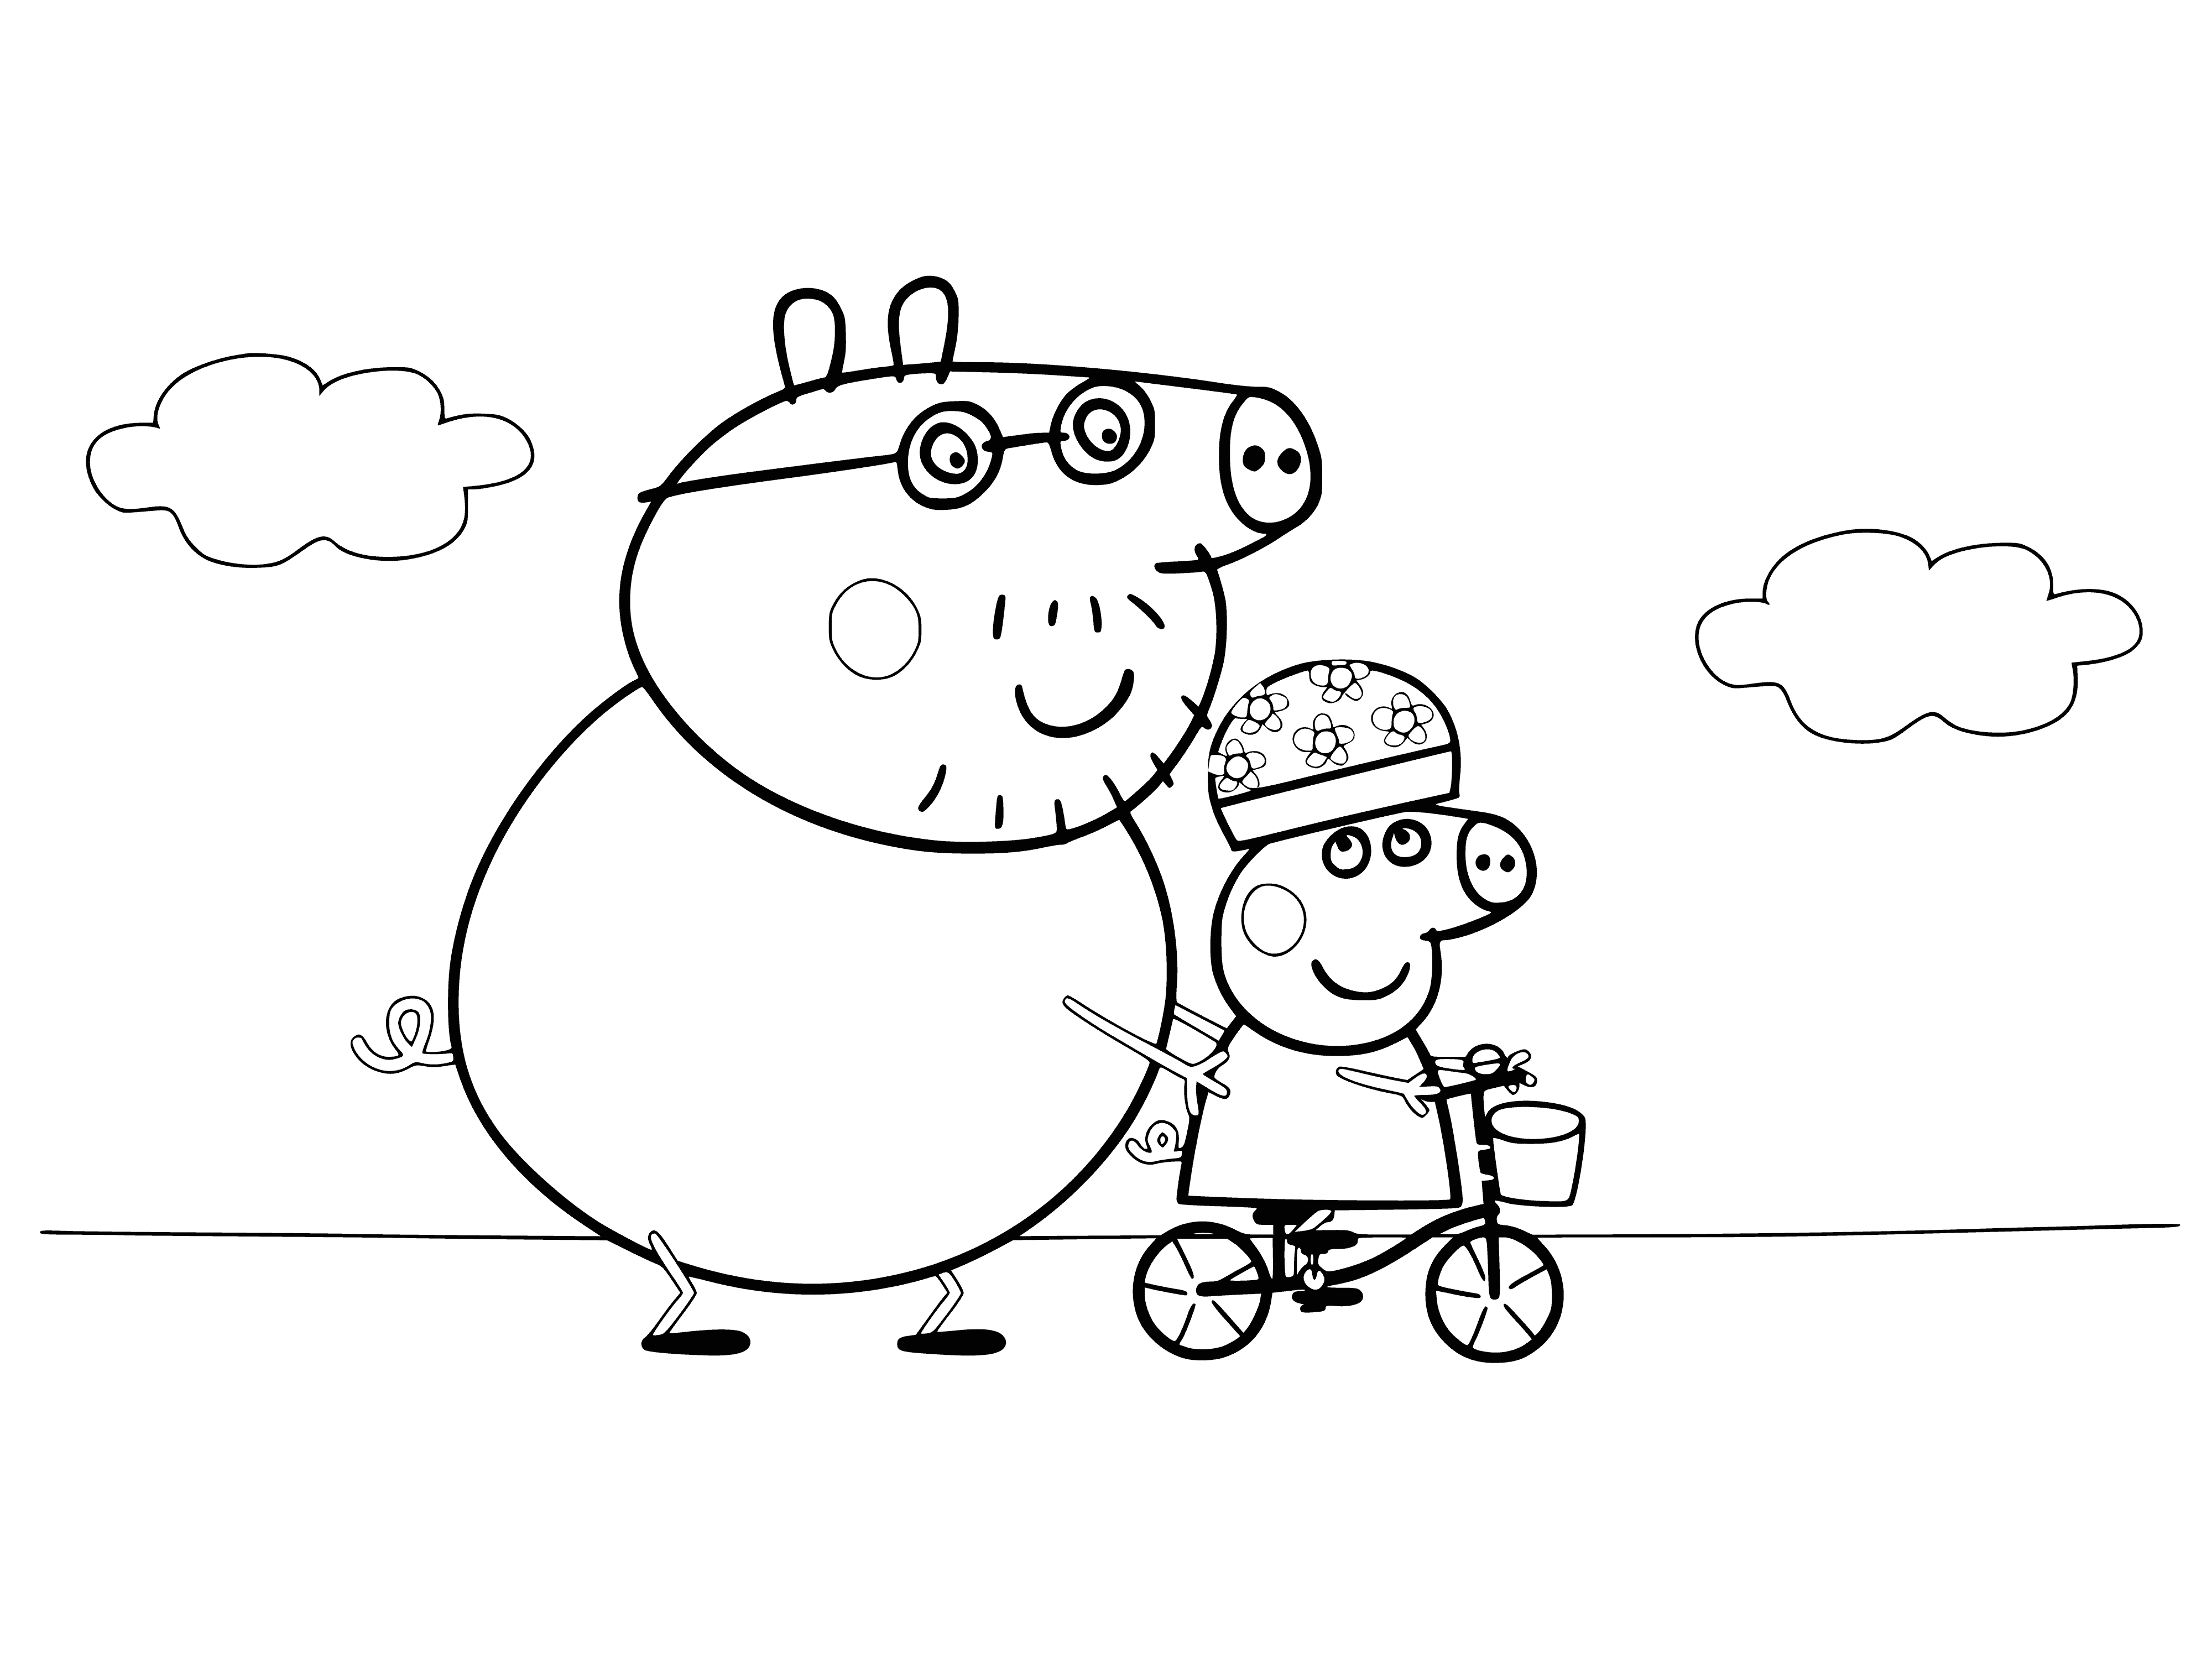 Peppa learning to ride a bike coloring page